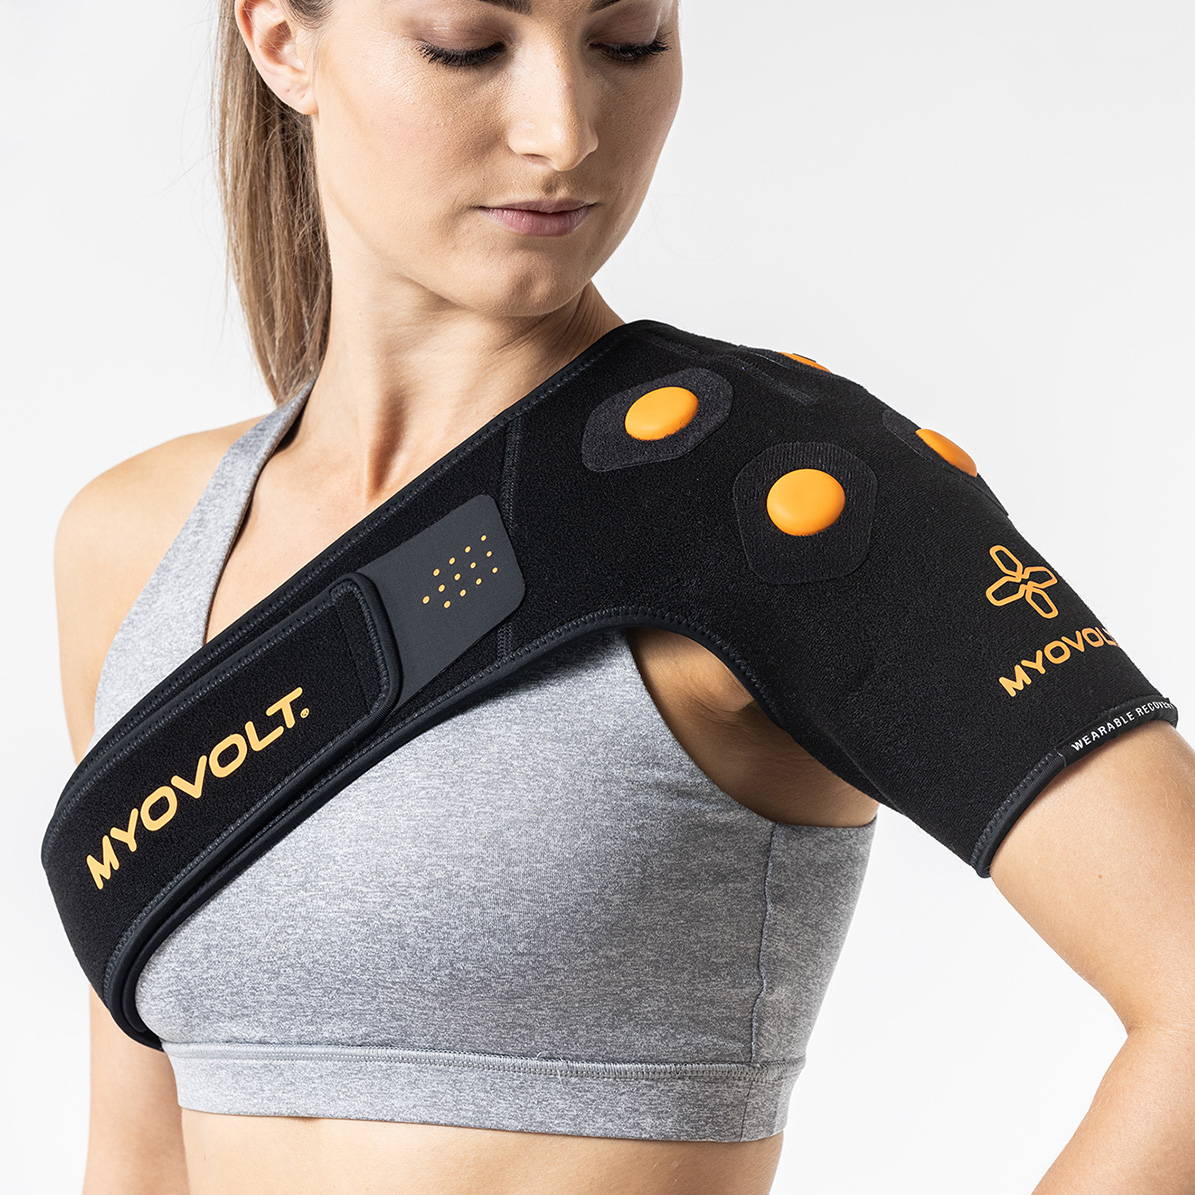 Myovolt vibration therapy shoulder brace relieves muscle pain and stiffness from Swimmer’s Shoulder, Frozen Shoulder and sports overuse injury. Wearable rehabilitation treatment for left or right shoulder.